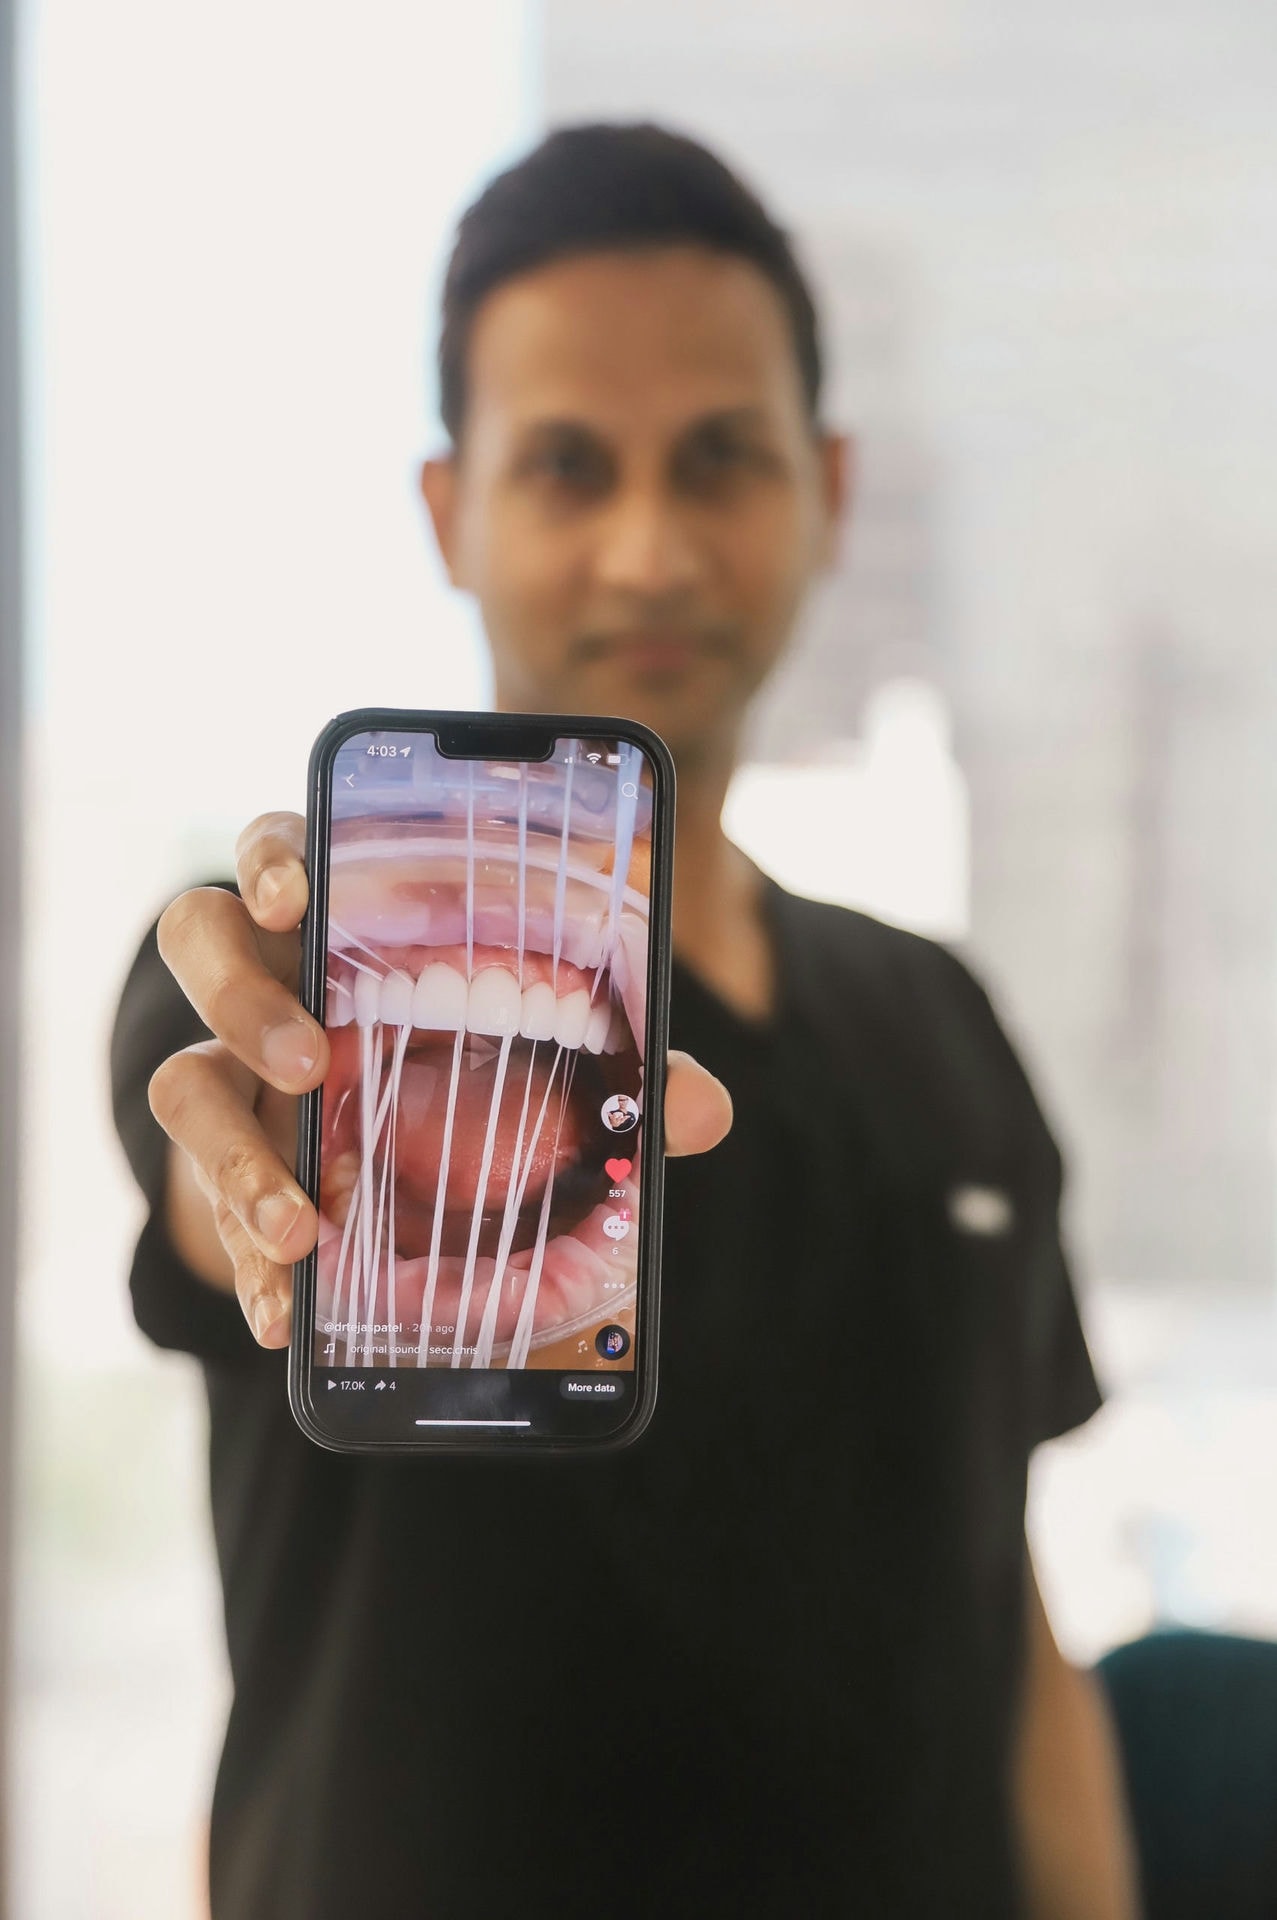 Dr. Tejas Patel’s passions for dentistry, education, and social media have enabled him to create a strong brand for his Austin cosmetic dental practice, while helping others in the process.